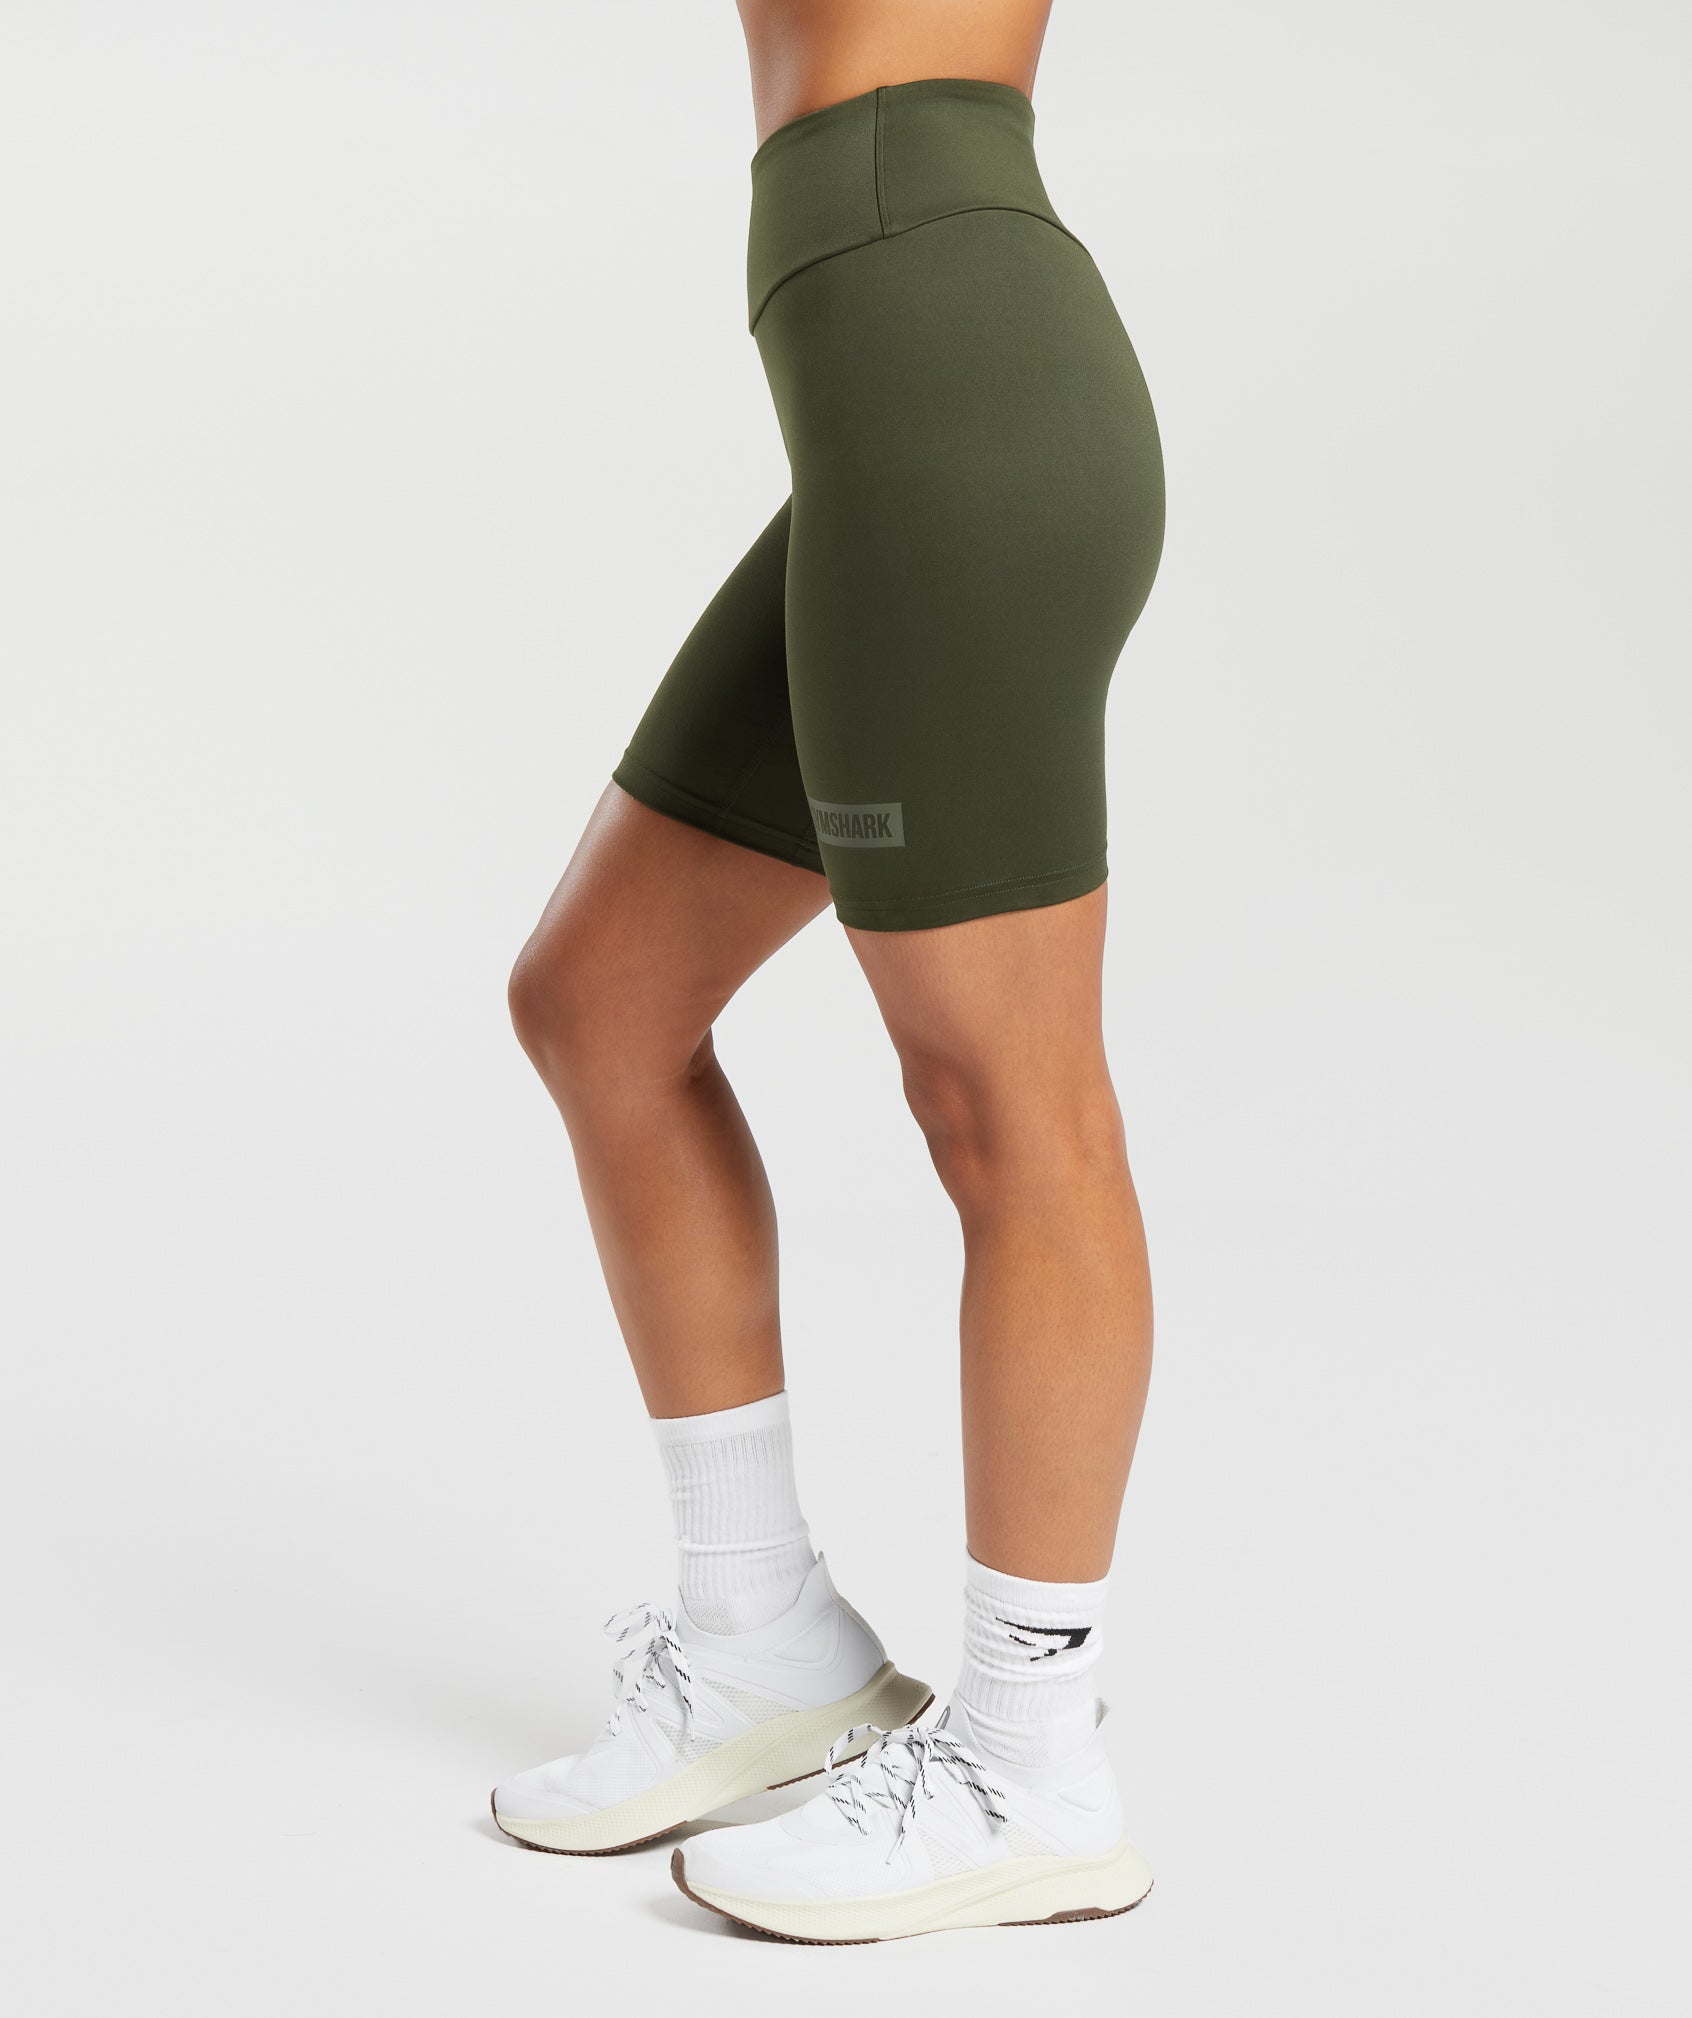 Block Cycling Shorts in Winter Olive - view 3